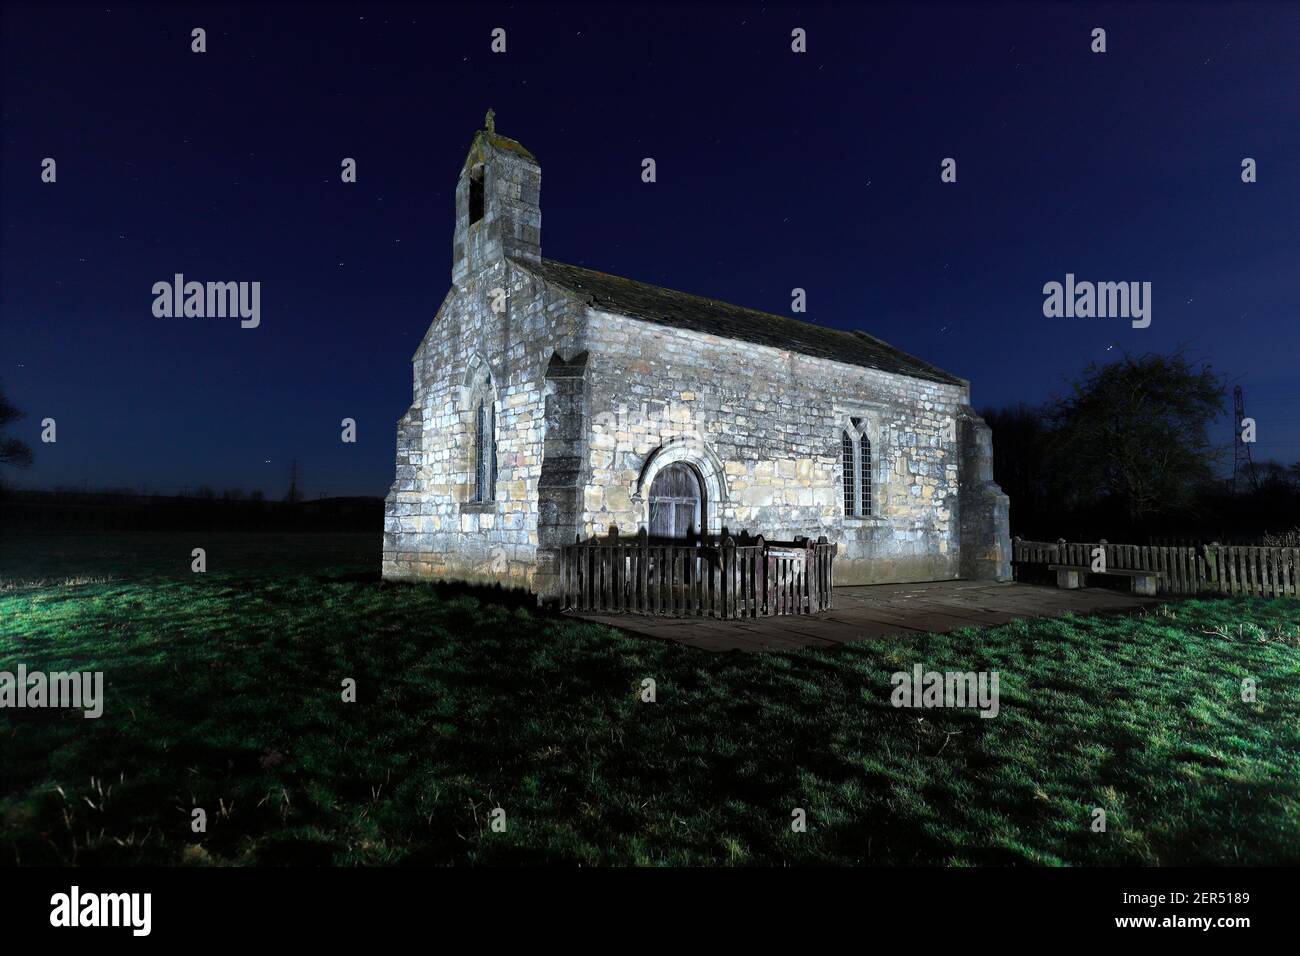 St Mary's Chapel, also known as St Mary's Church at Lead near Tadcaster. The church has been illuminated using a rgb led light Stock Photo